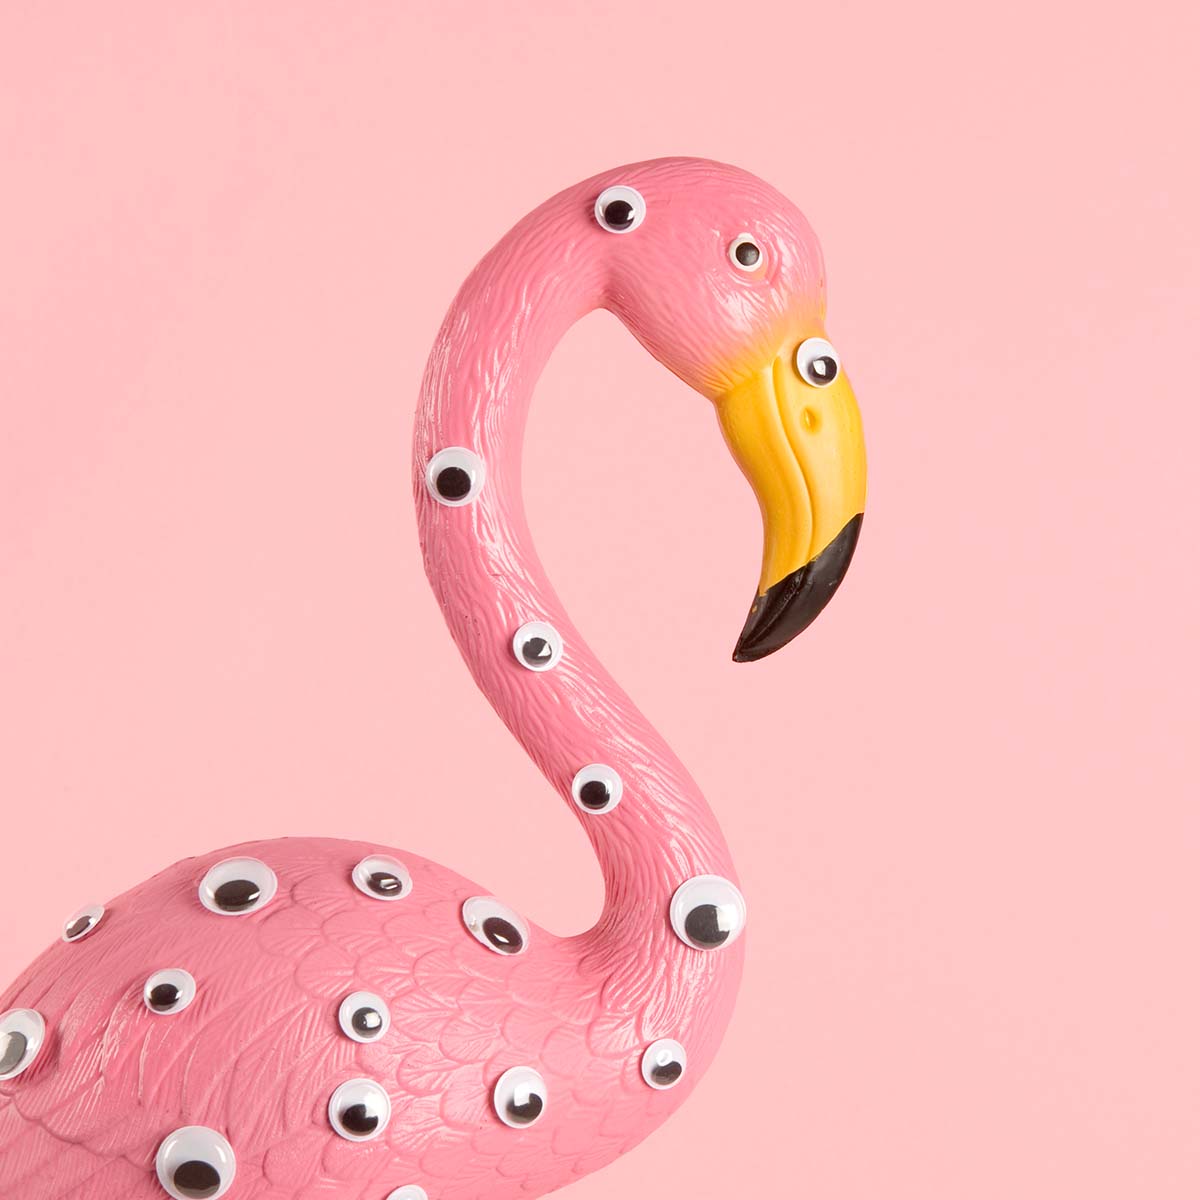 toy flamingo on pink background with googly eyes